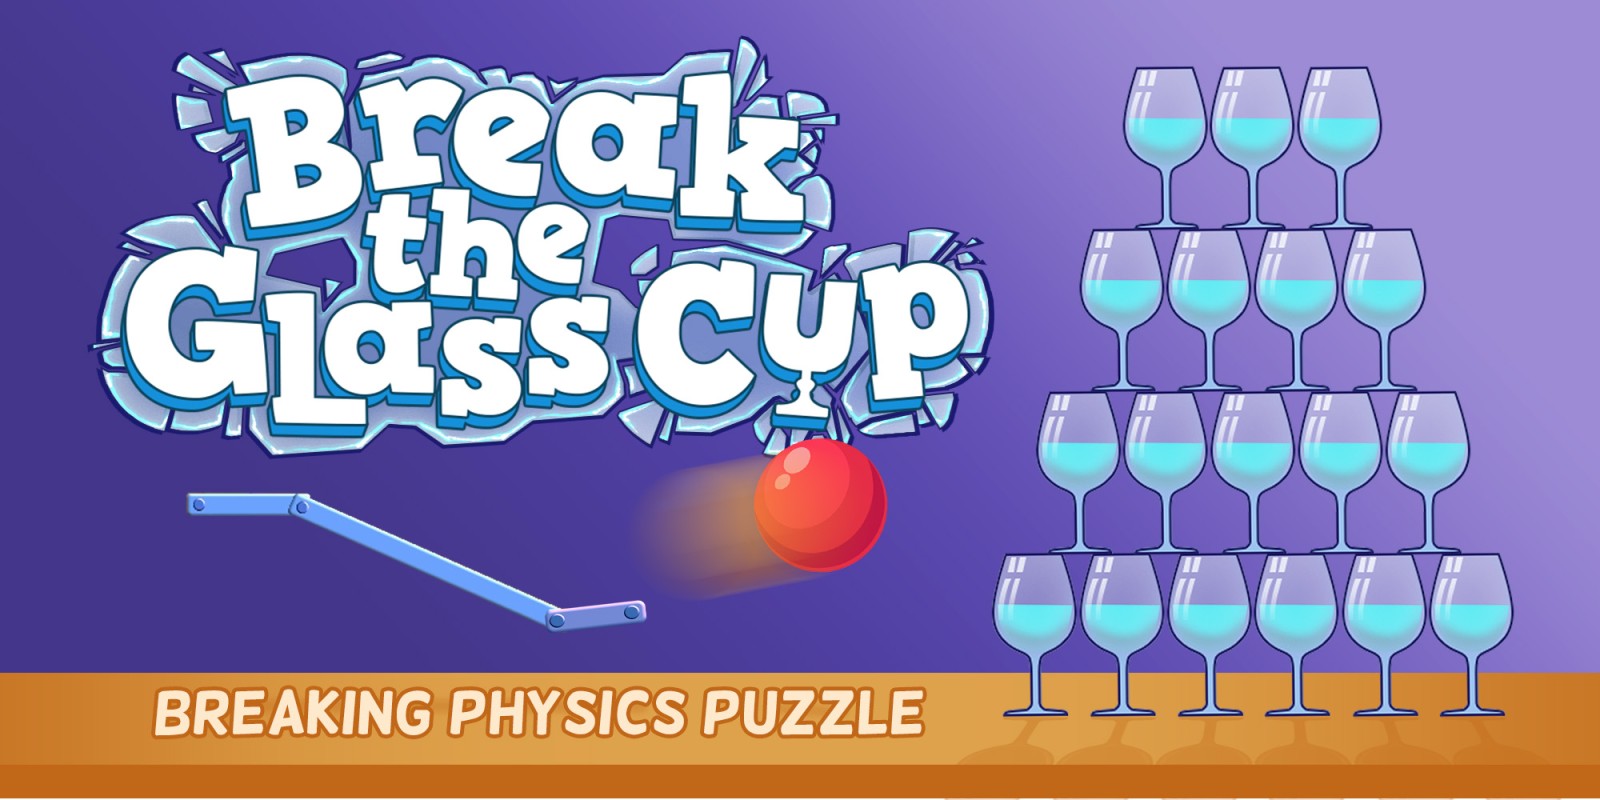 Break the Glass Cup: Breaking Physics Puzzle